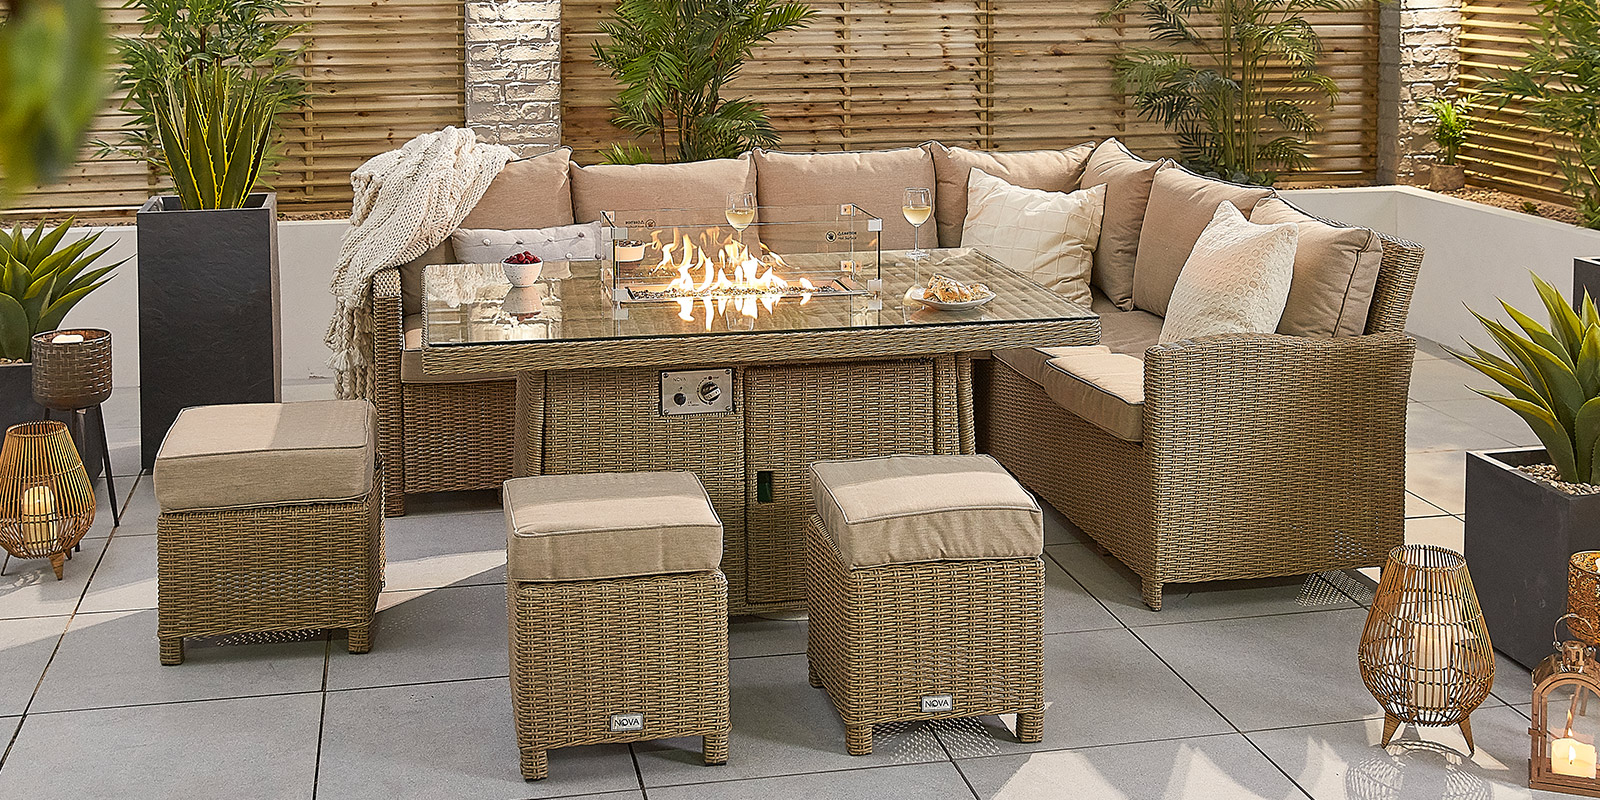 DIY Garden Furniture vs. the Real Thing